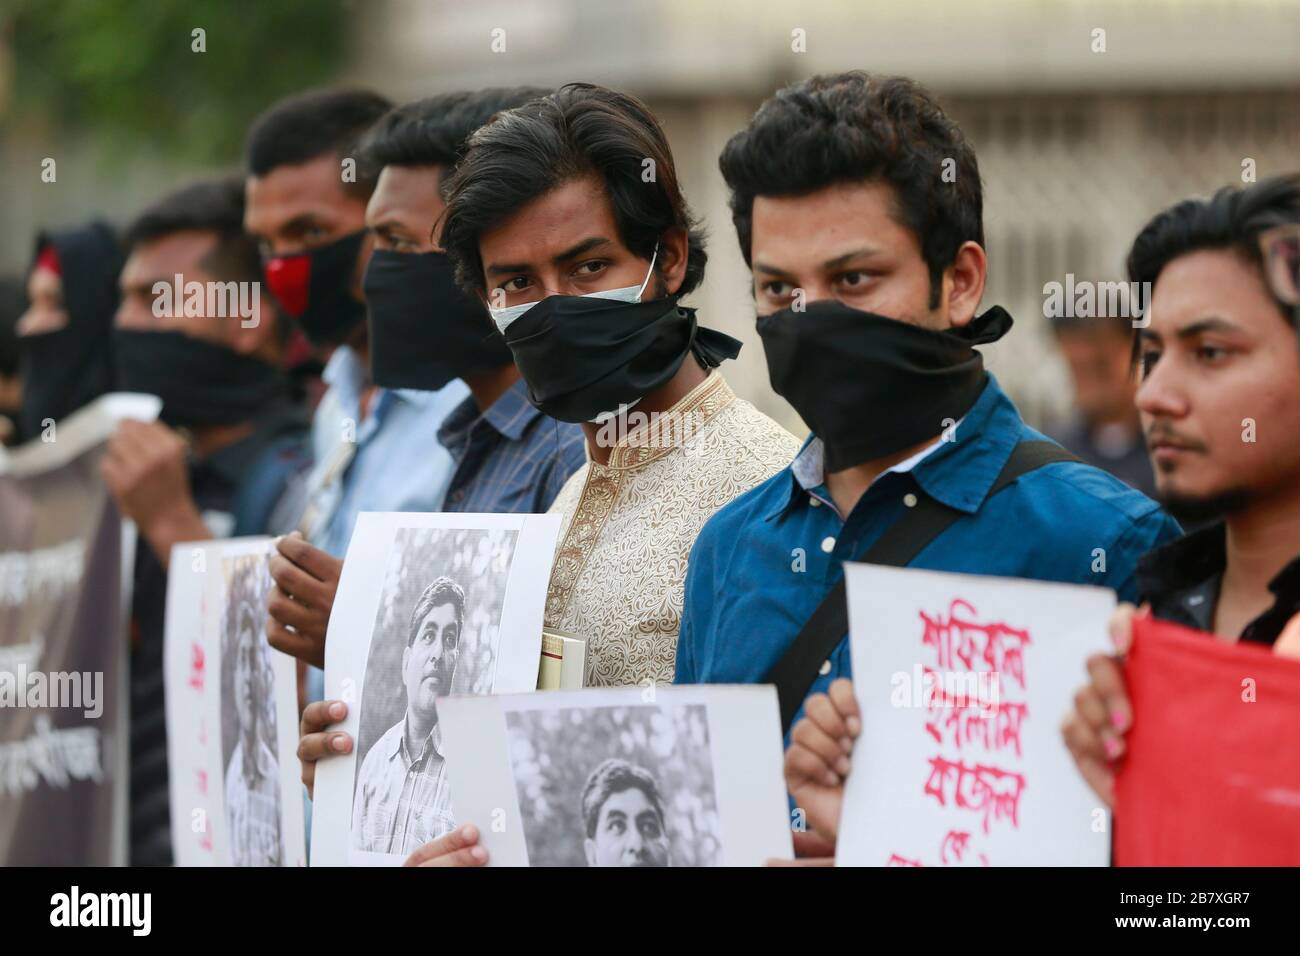 Dhaka, Bangladesh. 18th Mar, 2020. Bangladeshi photographers and social activists gather in a protest and formed a human chain demanding government trace missing photojournalist Shafiqul Islam Kajal, in Dhaka, Bangladesh, March 18, 2020. Shafiqul Islam Kazal went missing on 10th of this month, a day after defamation charges were lodged against him by an influential governing party legislator. Kazal, who worked as a senior photographer for several top dailies and edited his own small newspaper, disappeared after leaving his Dhaka home for work. Credit: ZUMA Press, Inc./Alamy Live News Stock Photo